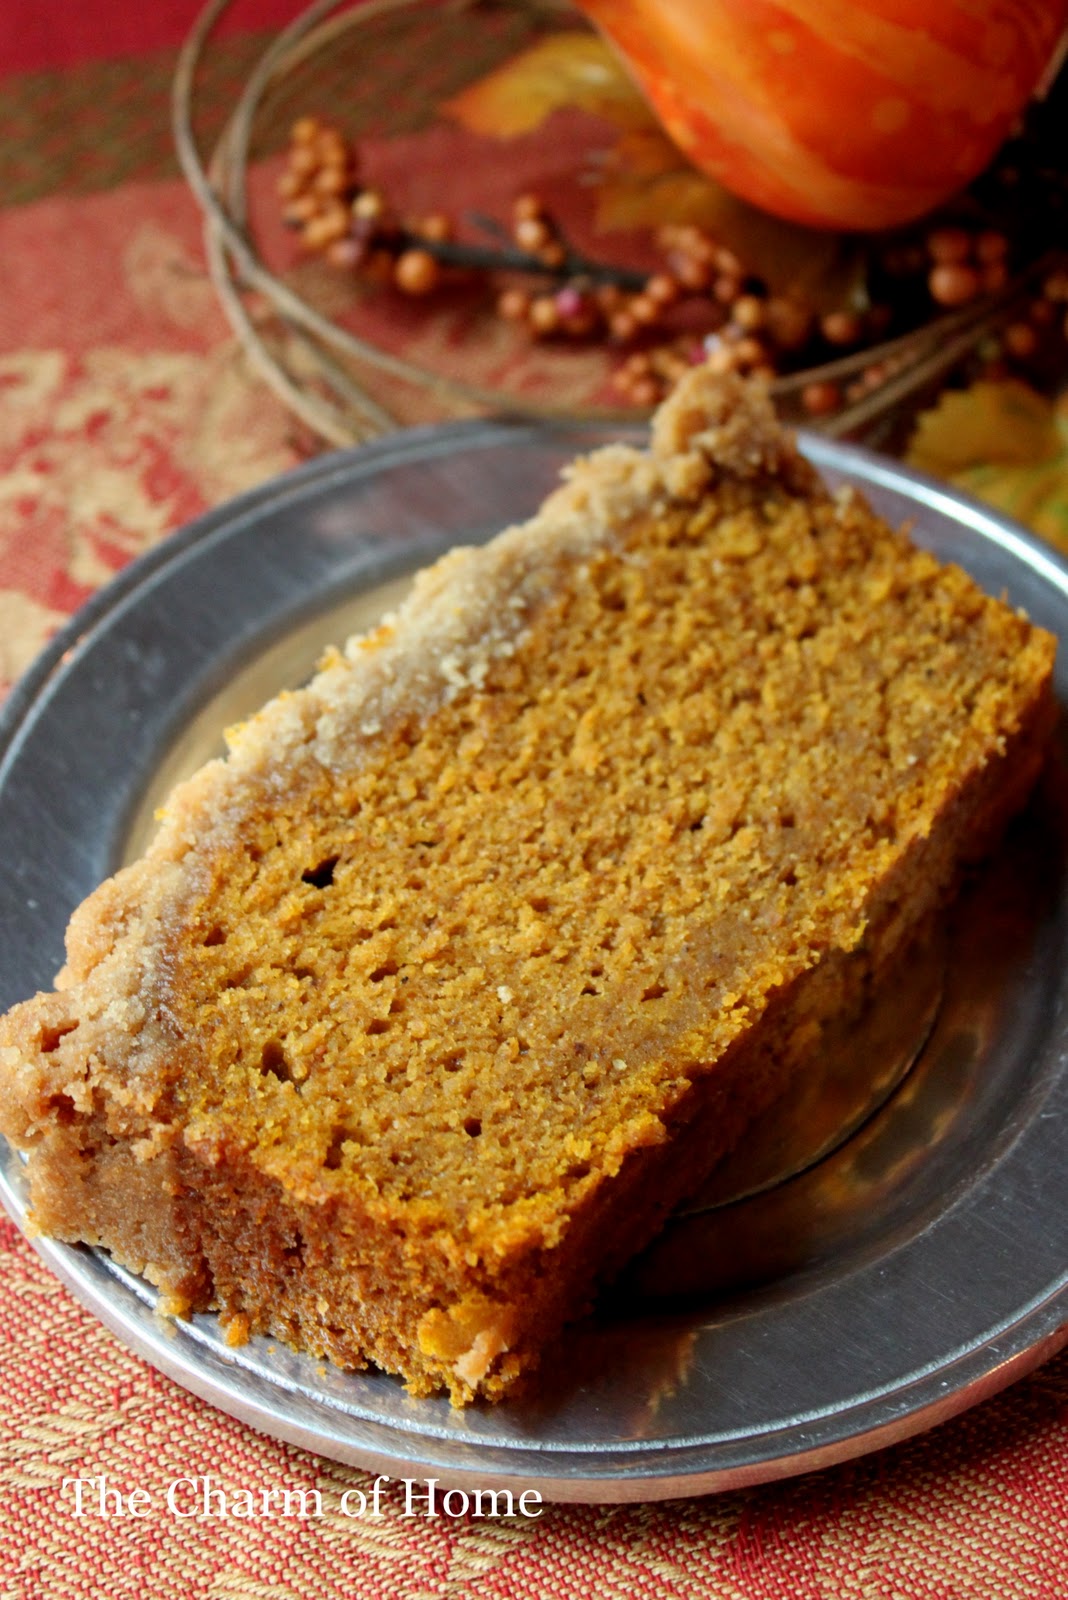 The Charm of Home: Streusel Topped Pumpkin Bread